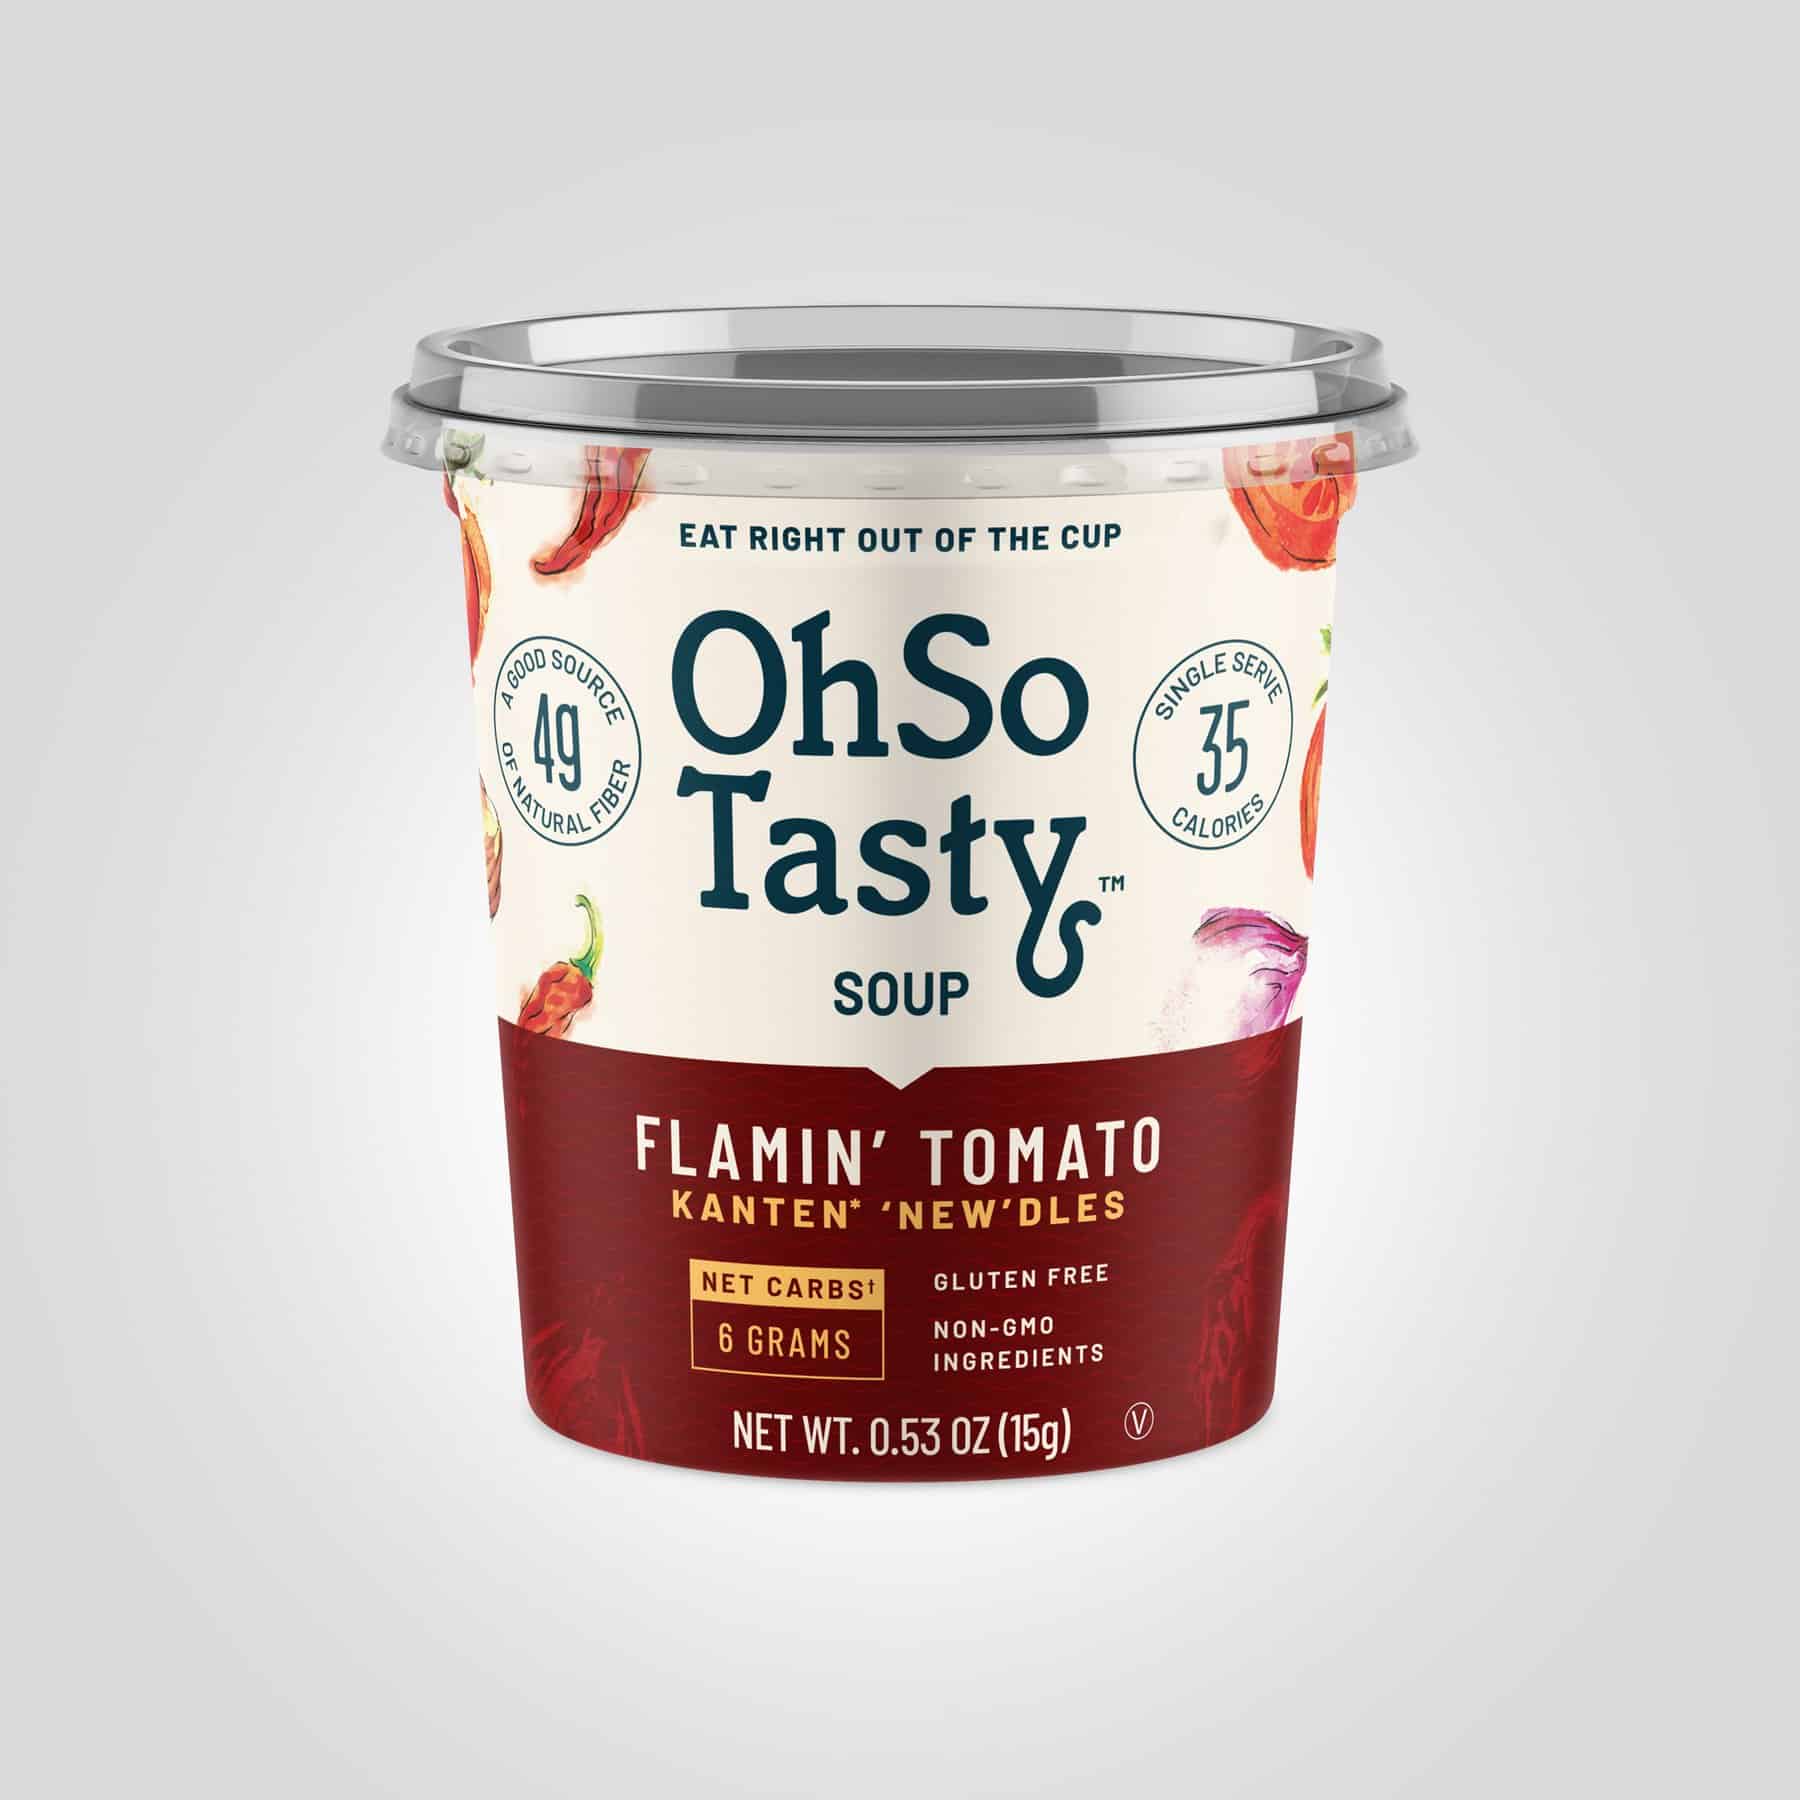 OhSo Tasty 3D mockup of the brand’s packaging, providing strong product images with a dark red label.